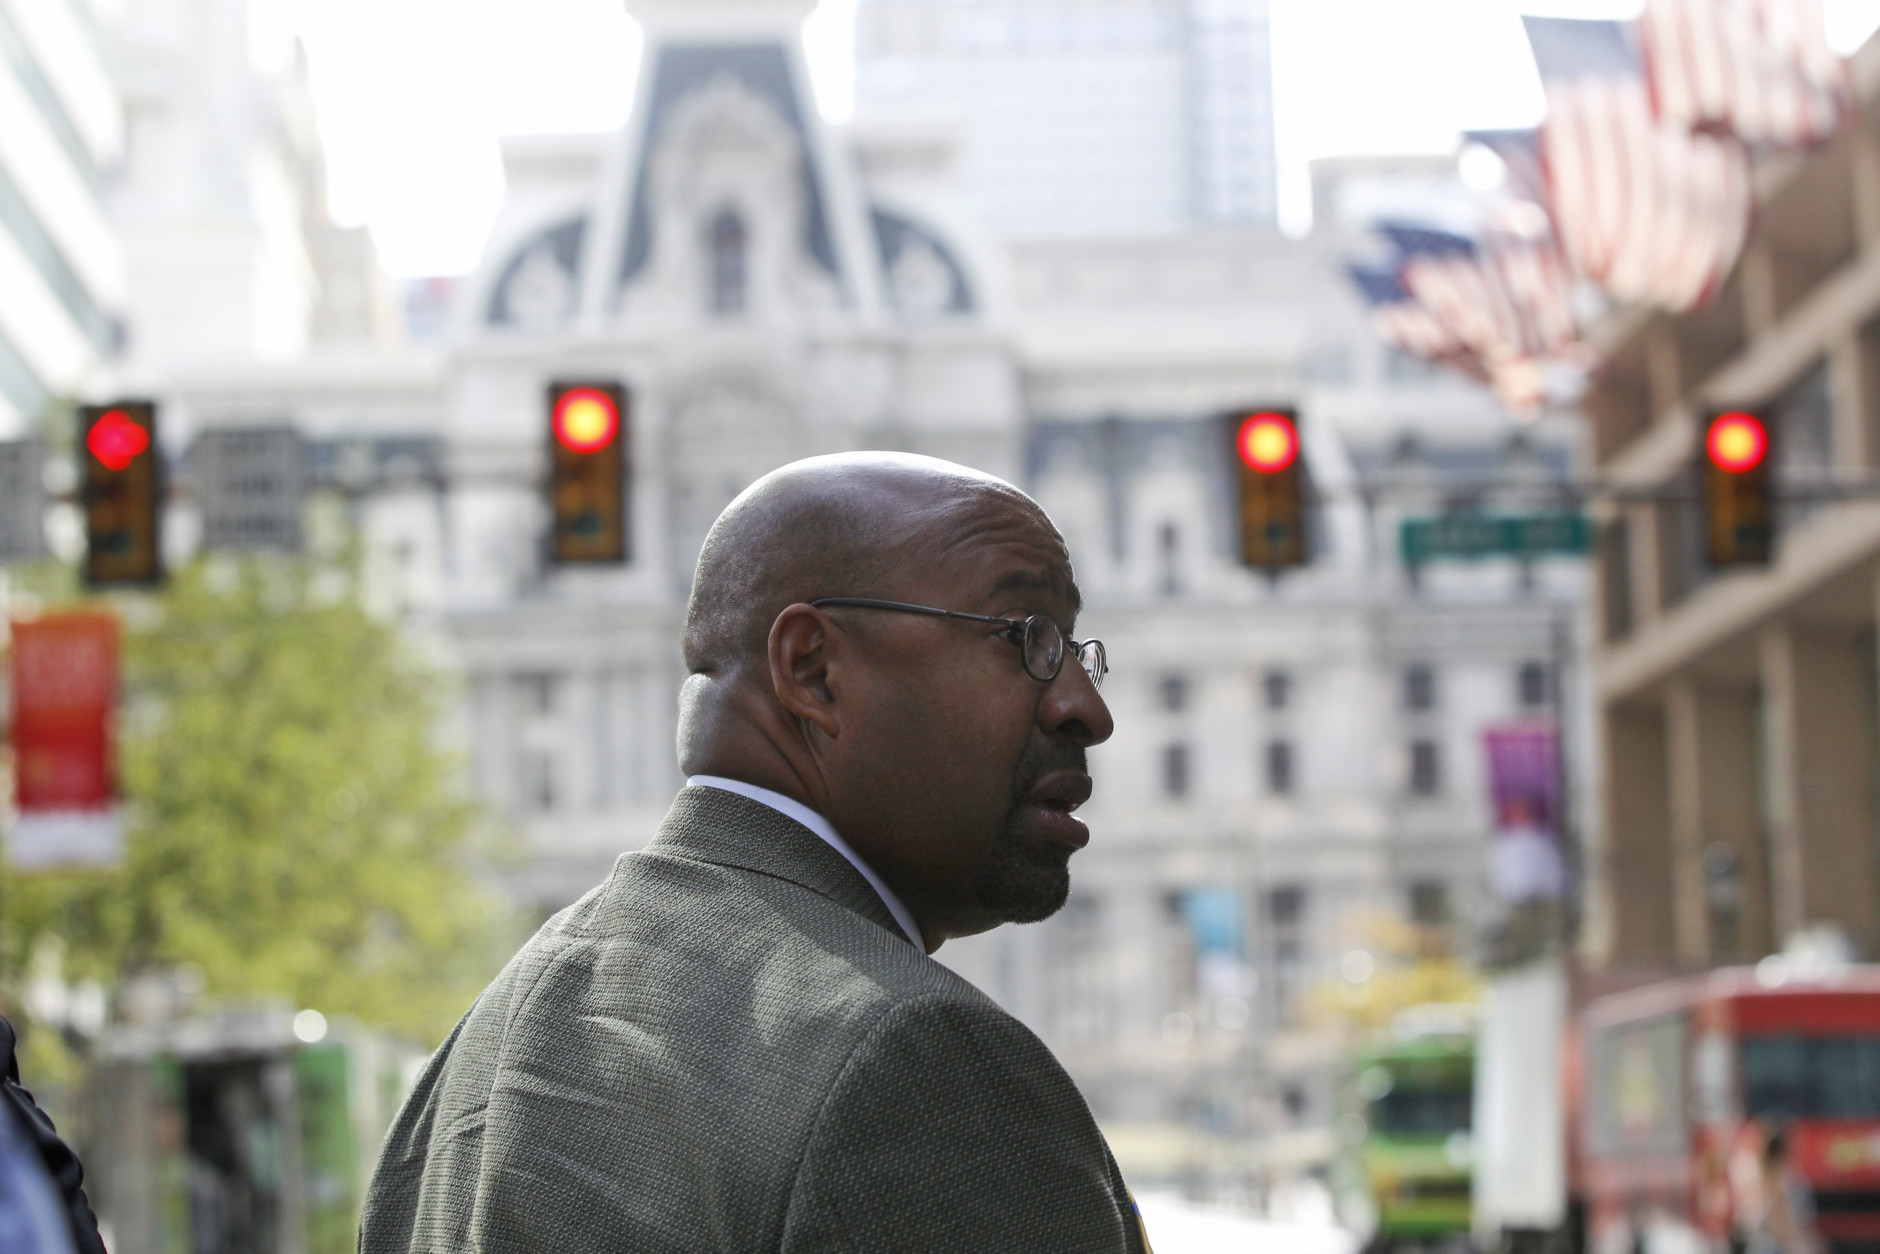 Philadelphia Mayor Michael Nutter walks down a blocked off Market Street, with City Hall in the background, in Philadelphia on Friday, Sept. 25, 2015, before Pope Francis' upcoming trip. (AP Photo/Mel Evans)